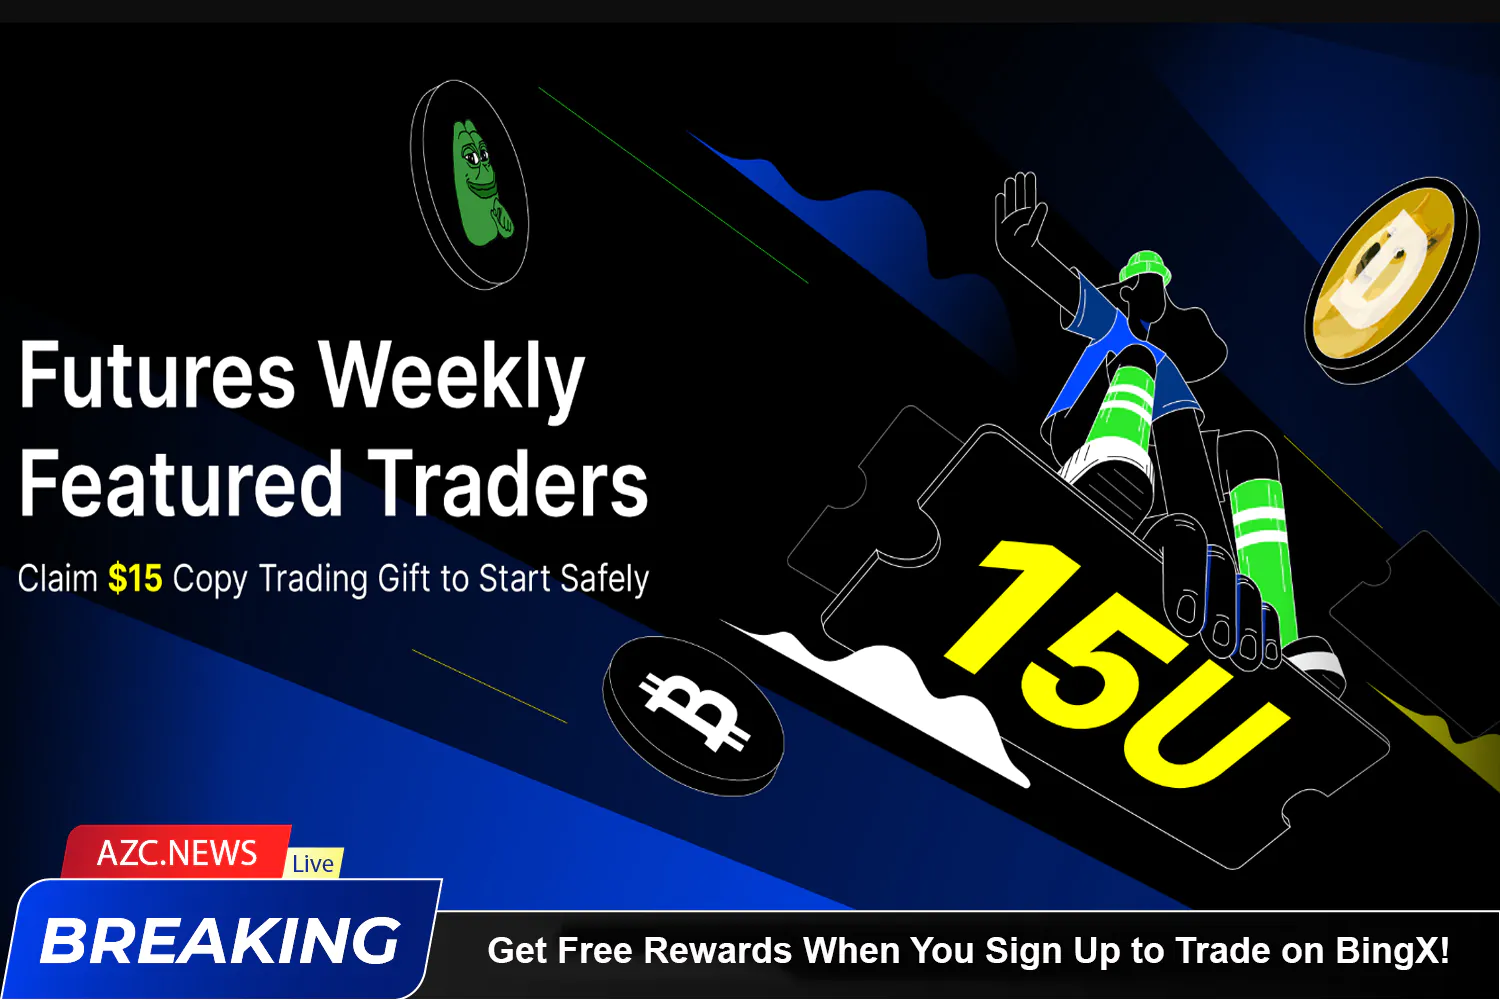 Get Free Rewards When You Sign Up To Trade On Bingx